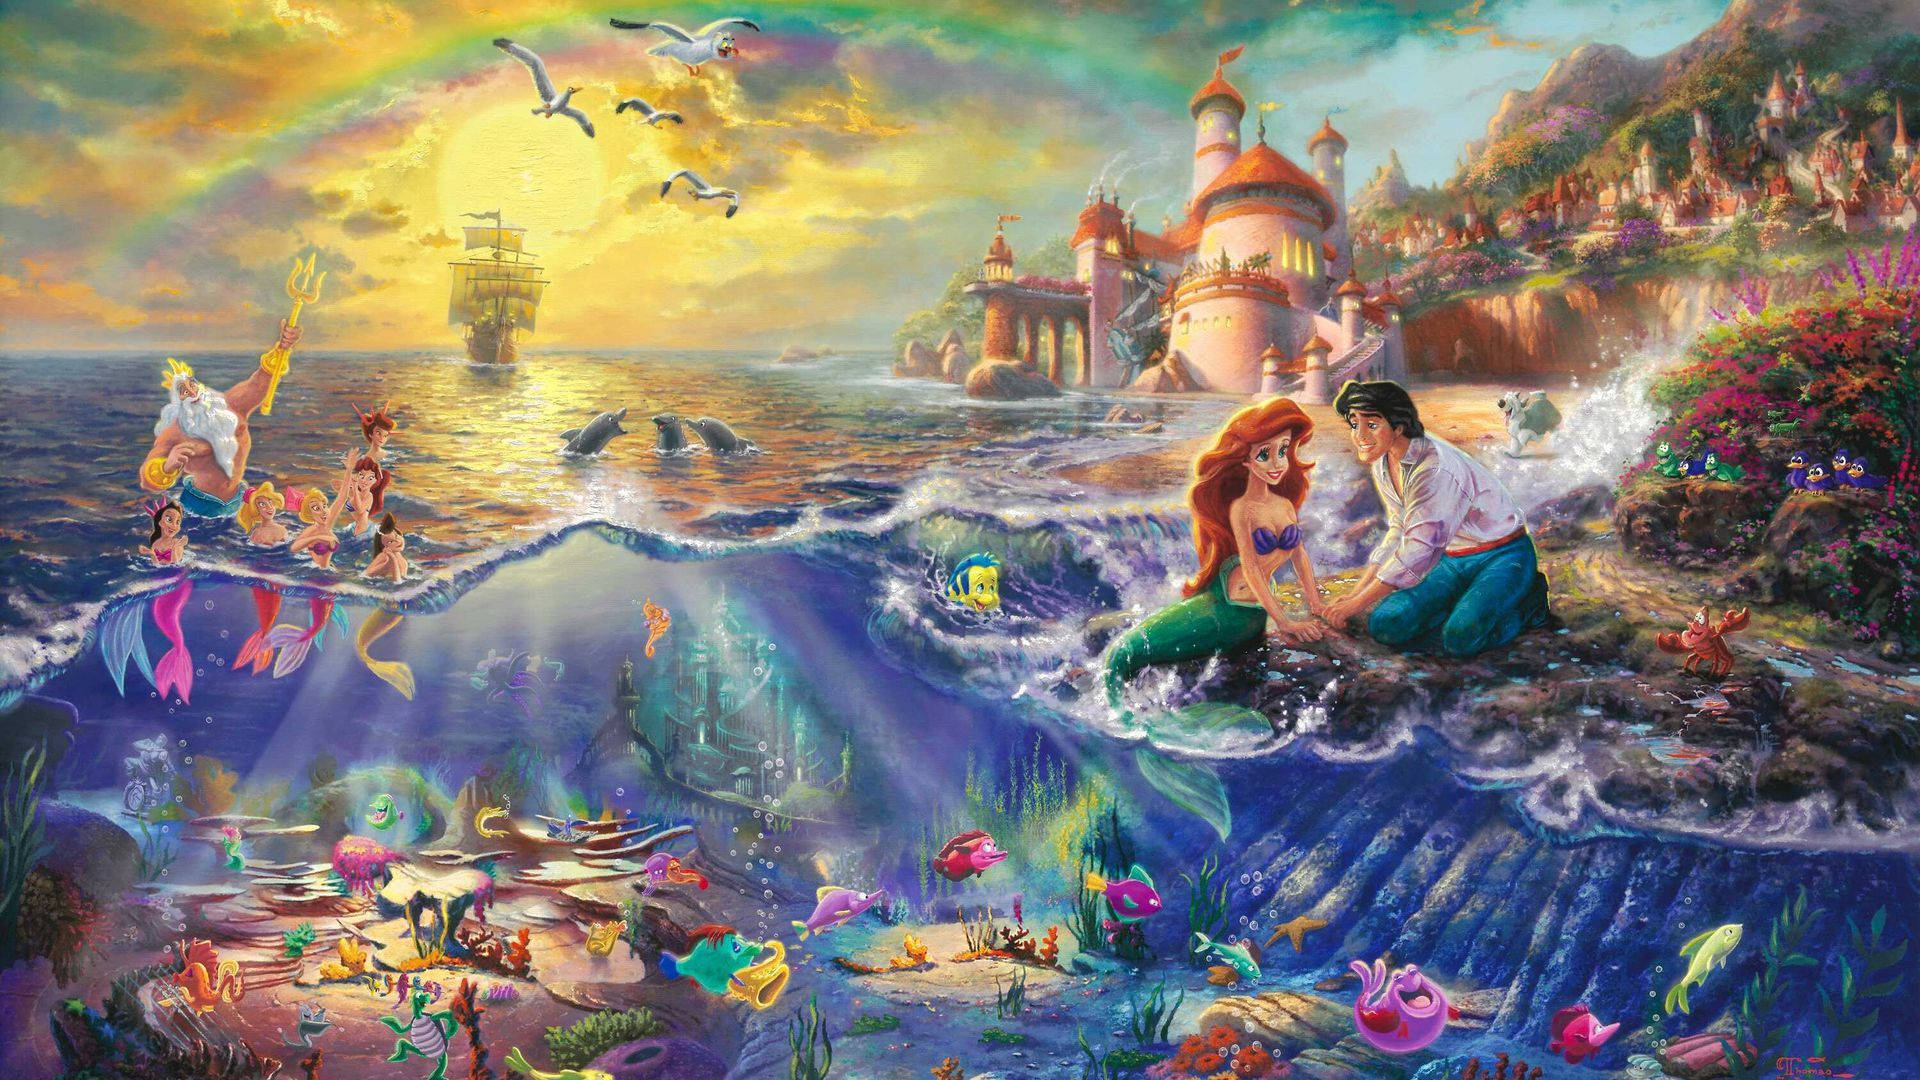 Disney 1920x1080 Hd The Little Mermaid Characters By Sea Background